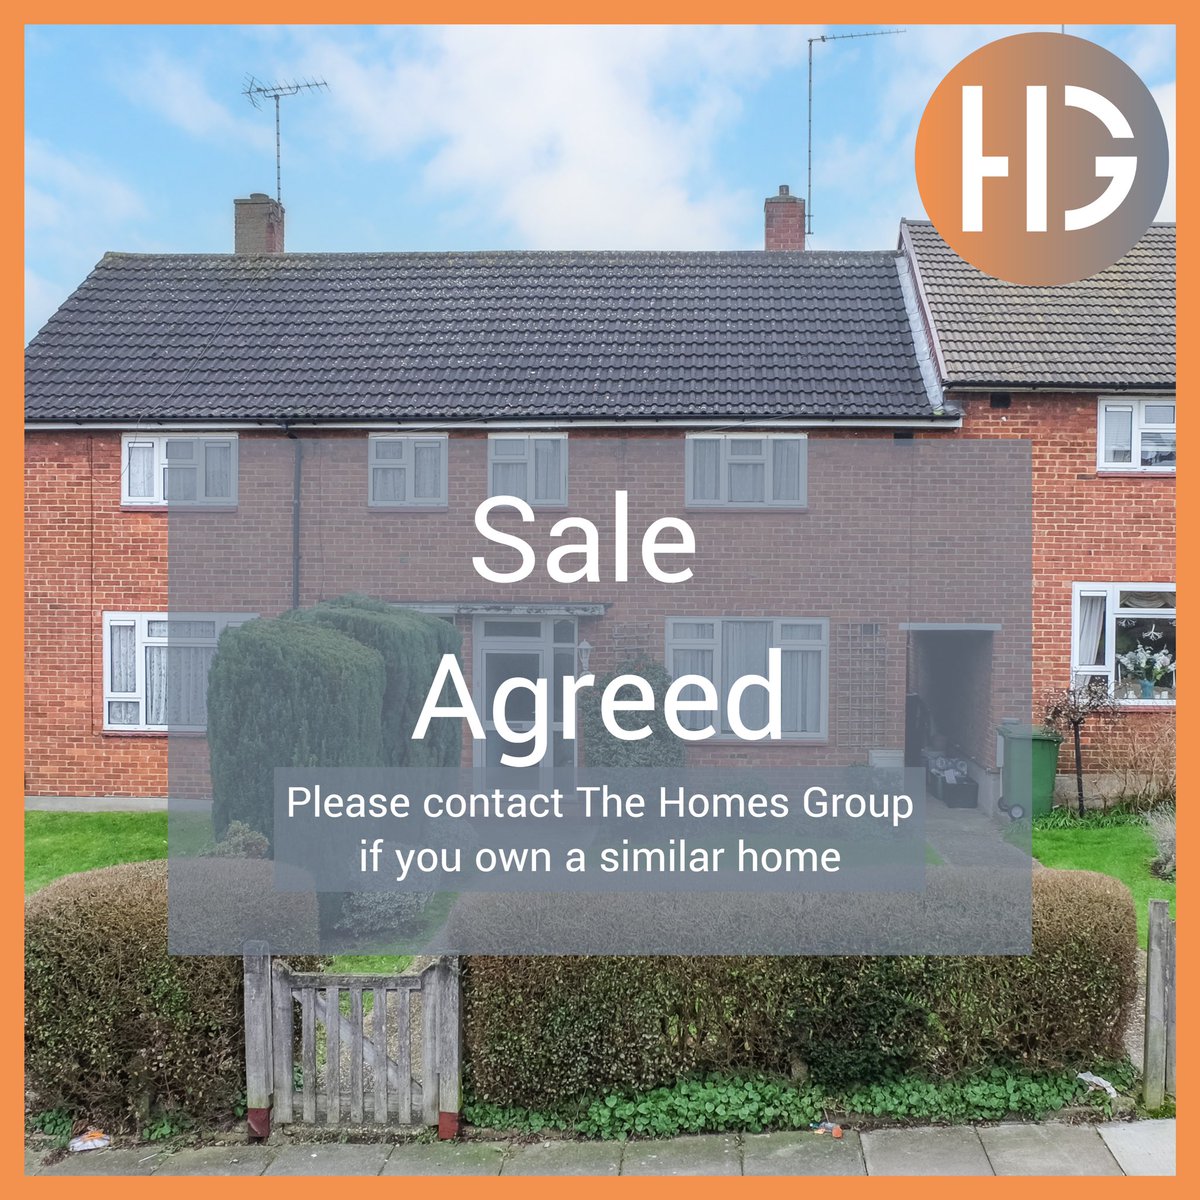 Sale Agreed in Orpington 
We are delighted to have agreed the sale of this house in Orpington and look forward to progressing the sale through to a swift completion & handing over the keys. 
thehomesgroup.co.uk
#sellinghomes #sensitivesale #home